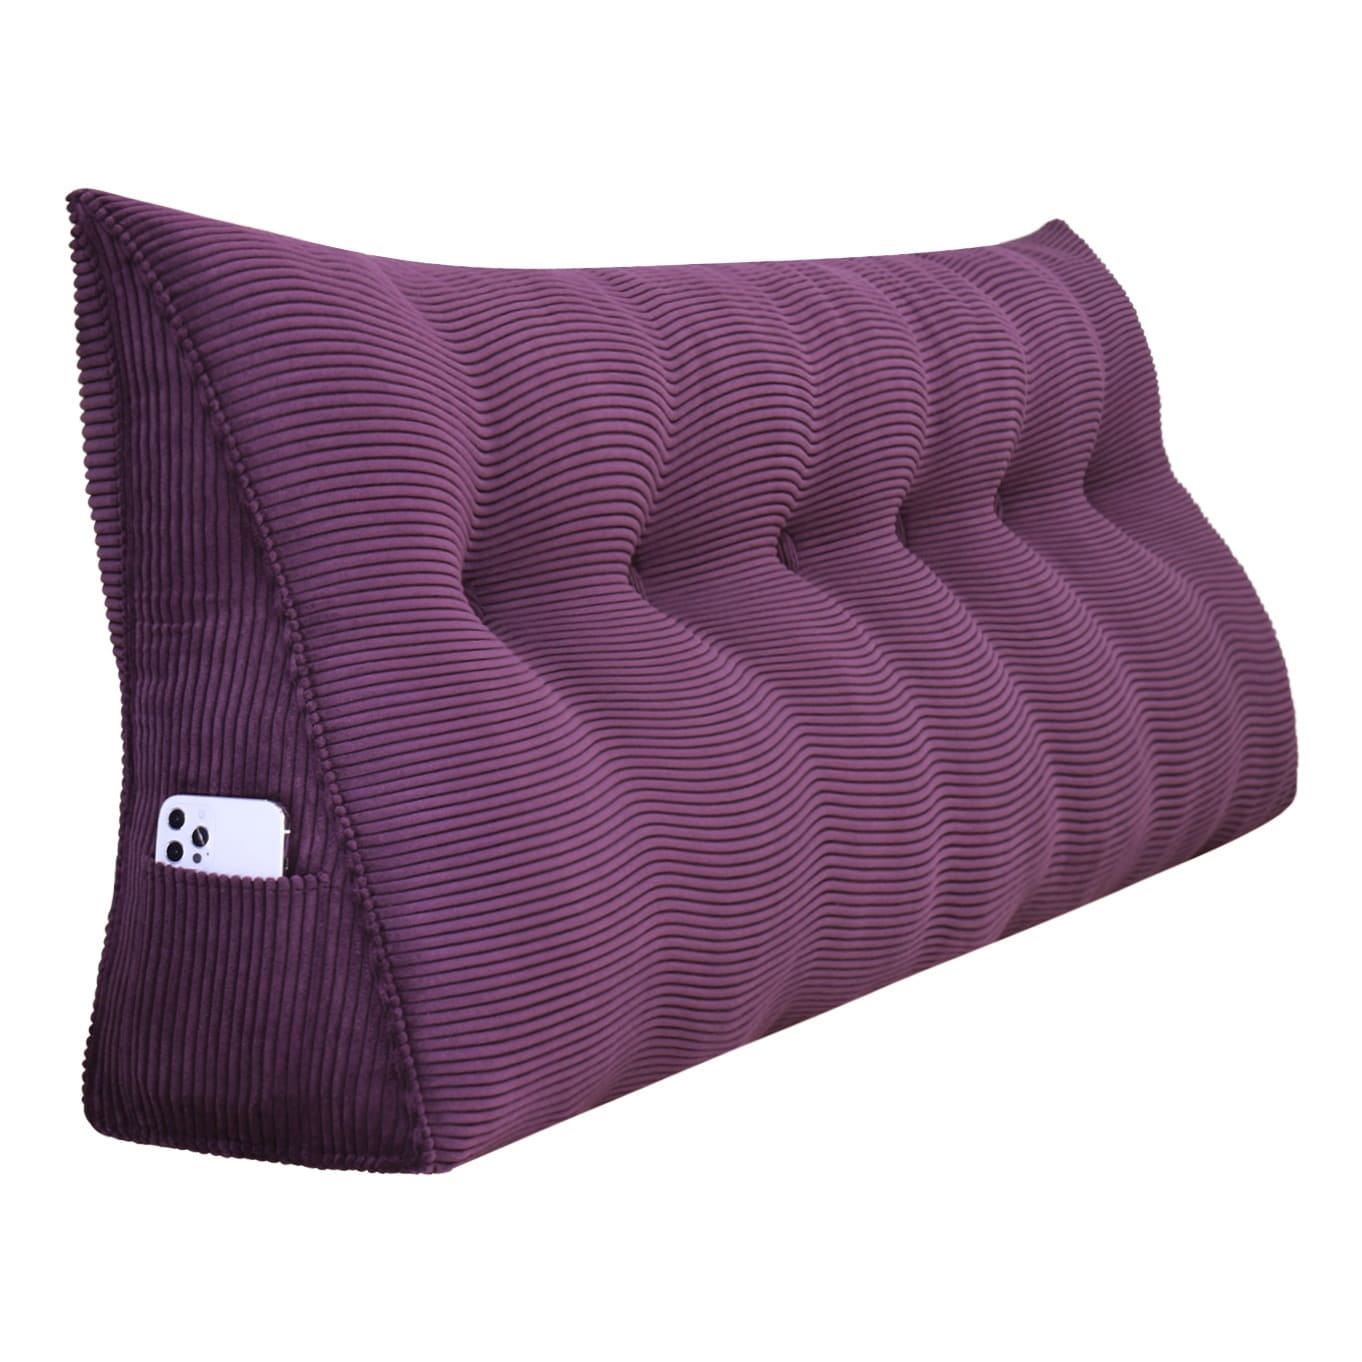 https://ak1.ostkcdn.com/images/products/is/images/direct/4277c6434bab72ff3699c0fc486243271c35c7db/WOWMAX-Headboard-Reading-Wedge-Backrest-Bed-Support-Pillow.jpg